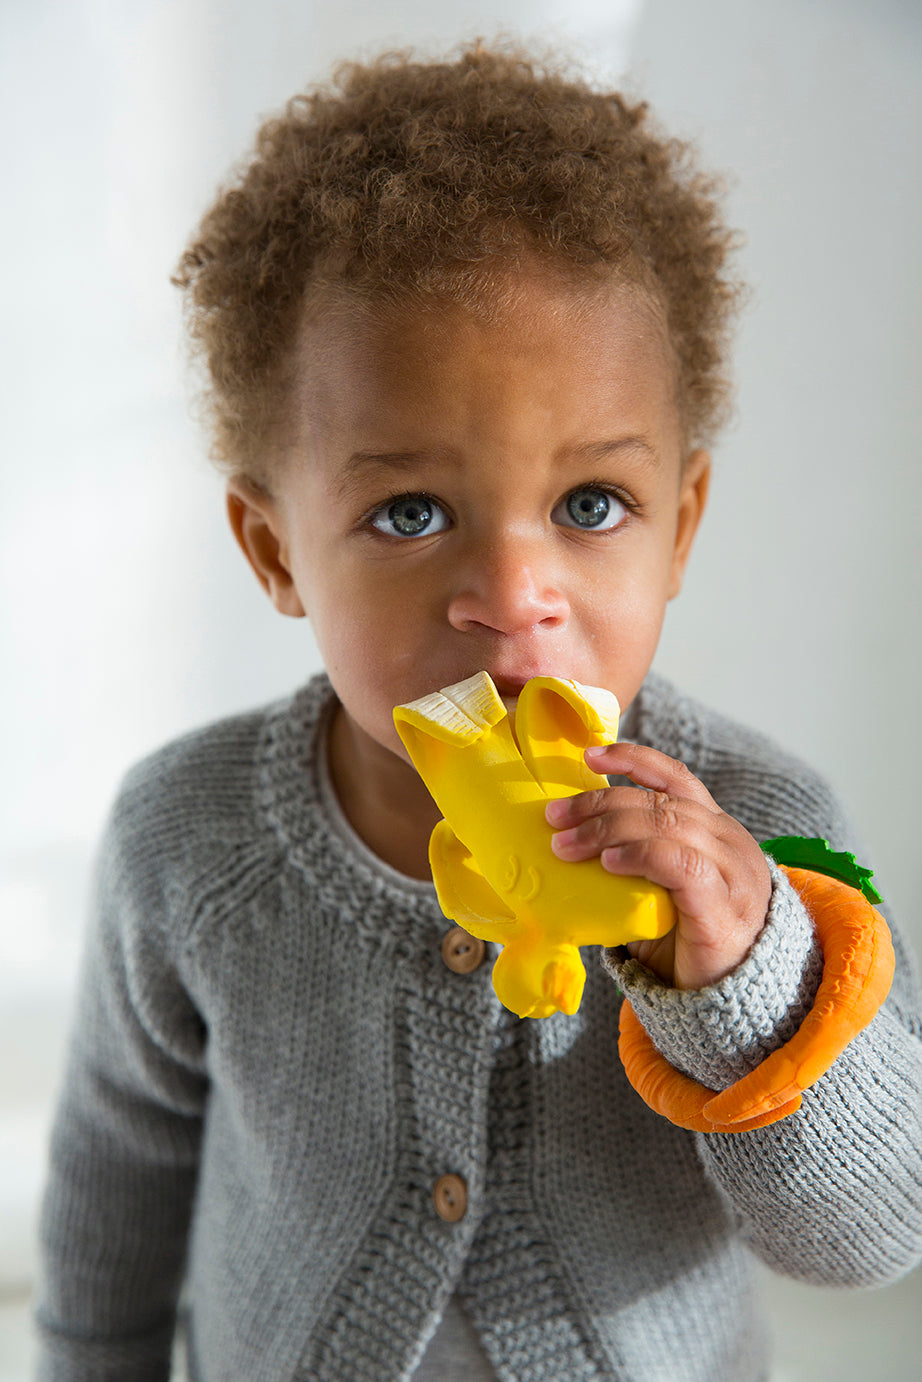 The Every Space Ana Banana natural rubber chewable teether by Oli & Carol